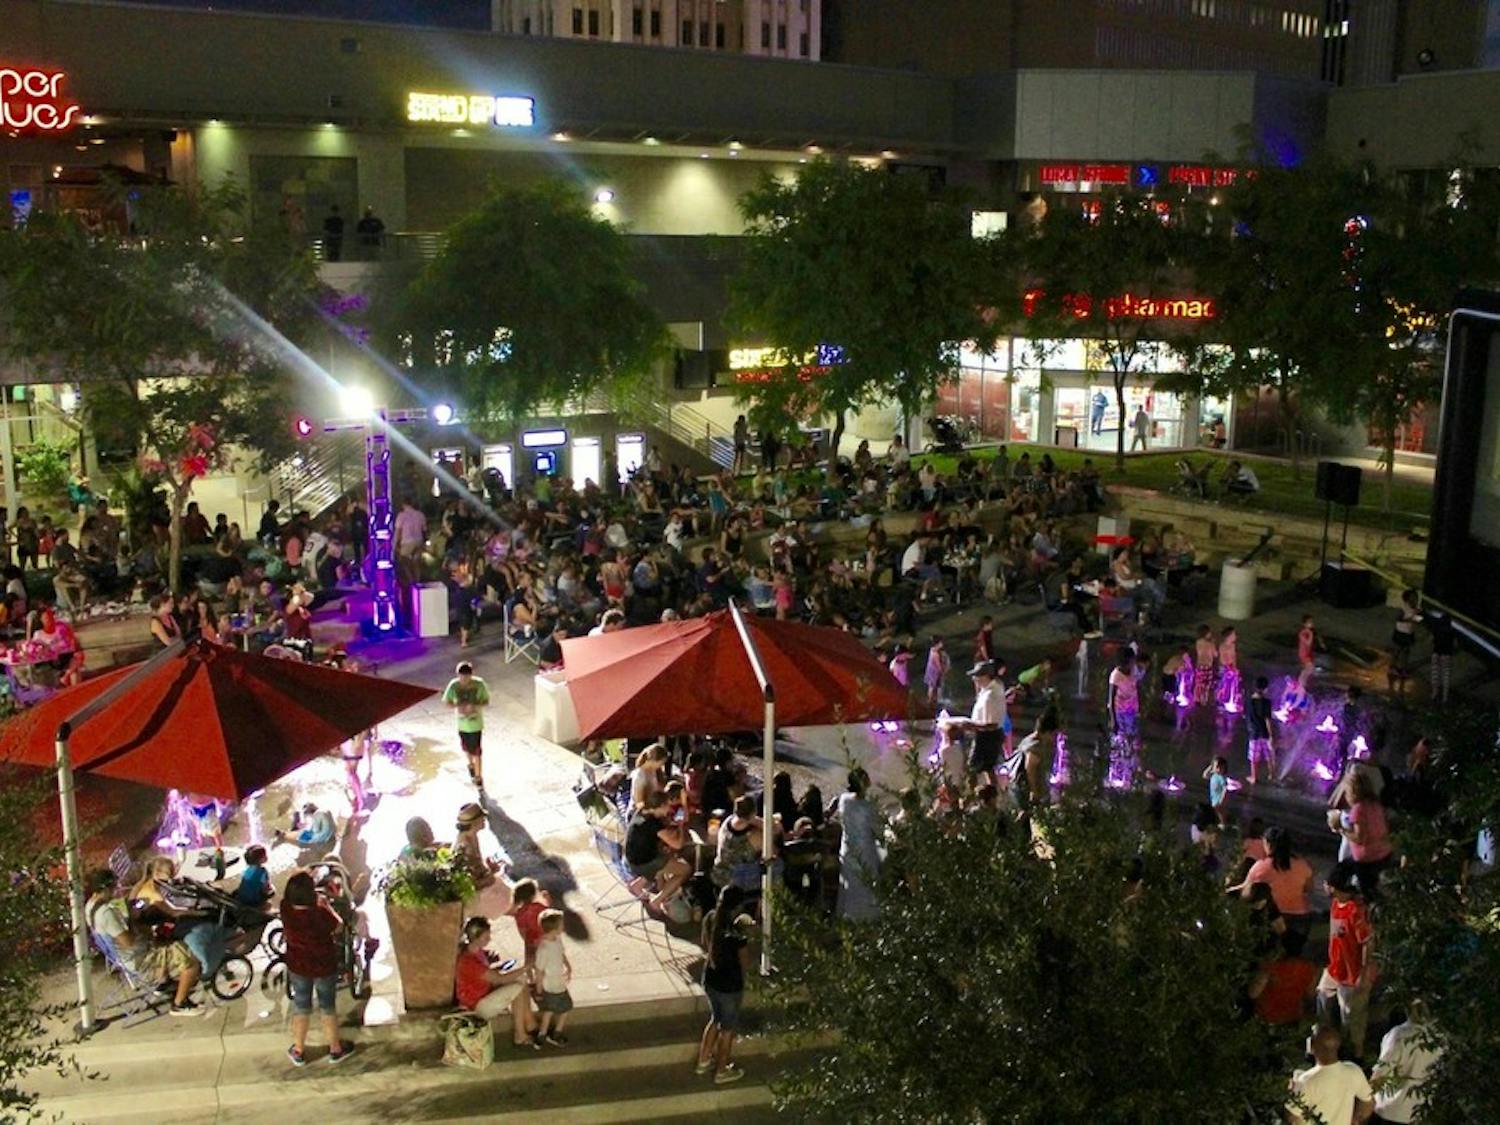 People watch movies as part of 'City Lights Movie Nights' at CityScape in downtown Phoenix in July 2015.